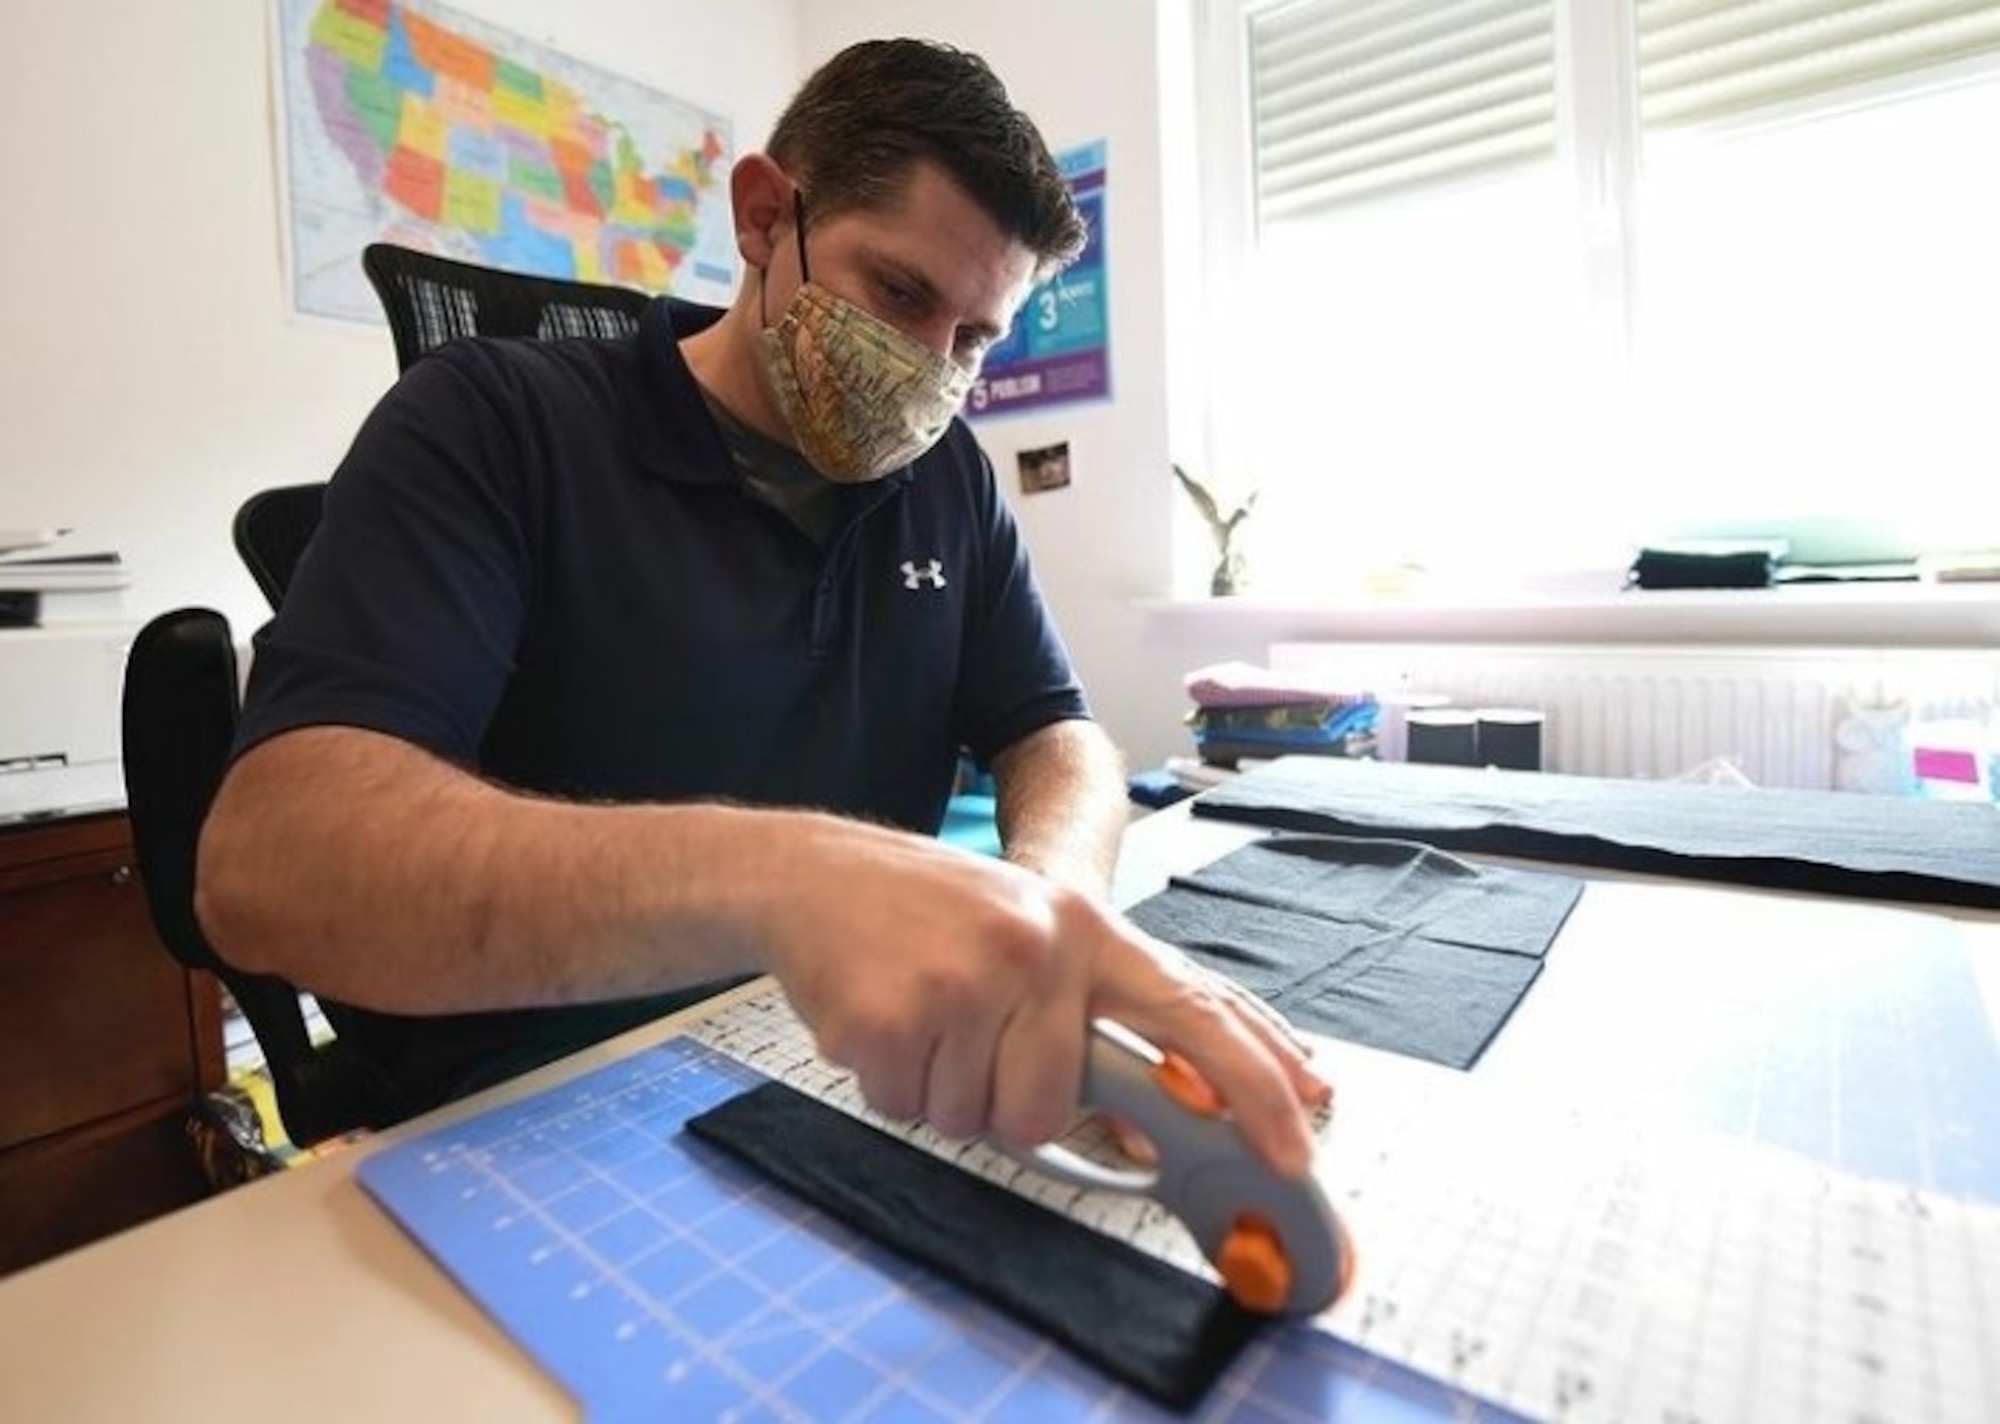 OSI 4th Field Investigations Squadron Special Agent Justin Acree cuts fabric for protective masks. SA Acree personally made 1,556 face covers for communities across Germany to help cope with the COVID-19 pandemic. (U.S. Air Force photo by SrA Elizabeth Baker, Ramstein AB/PA)